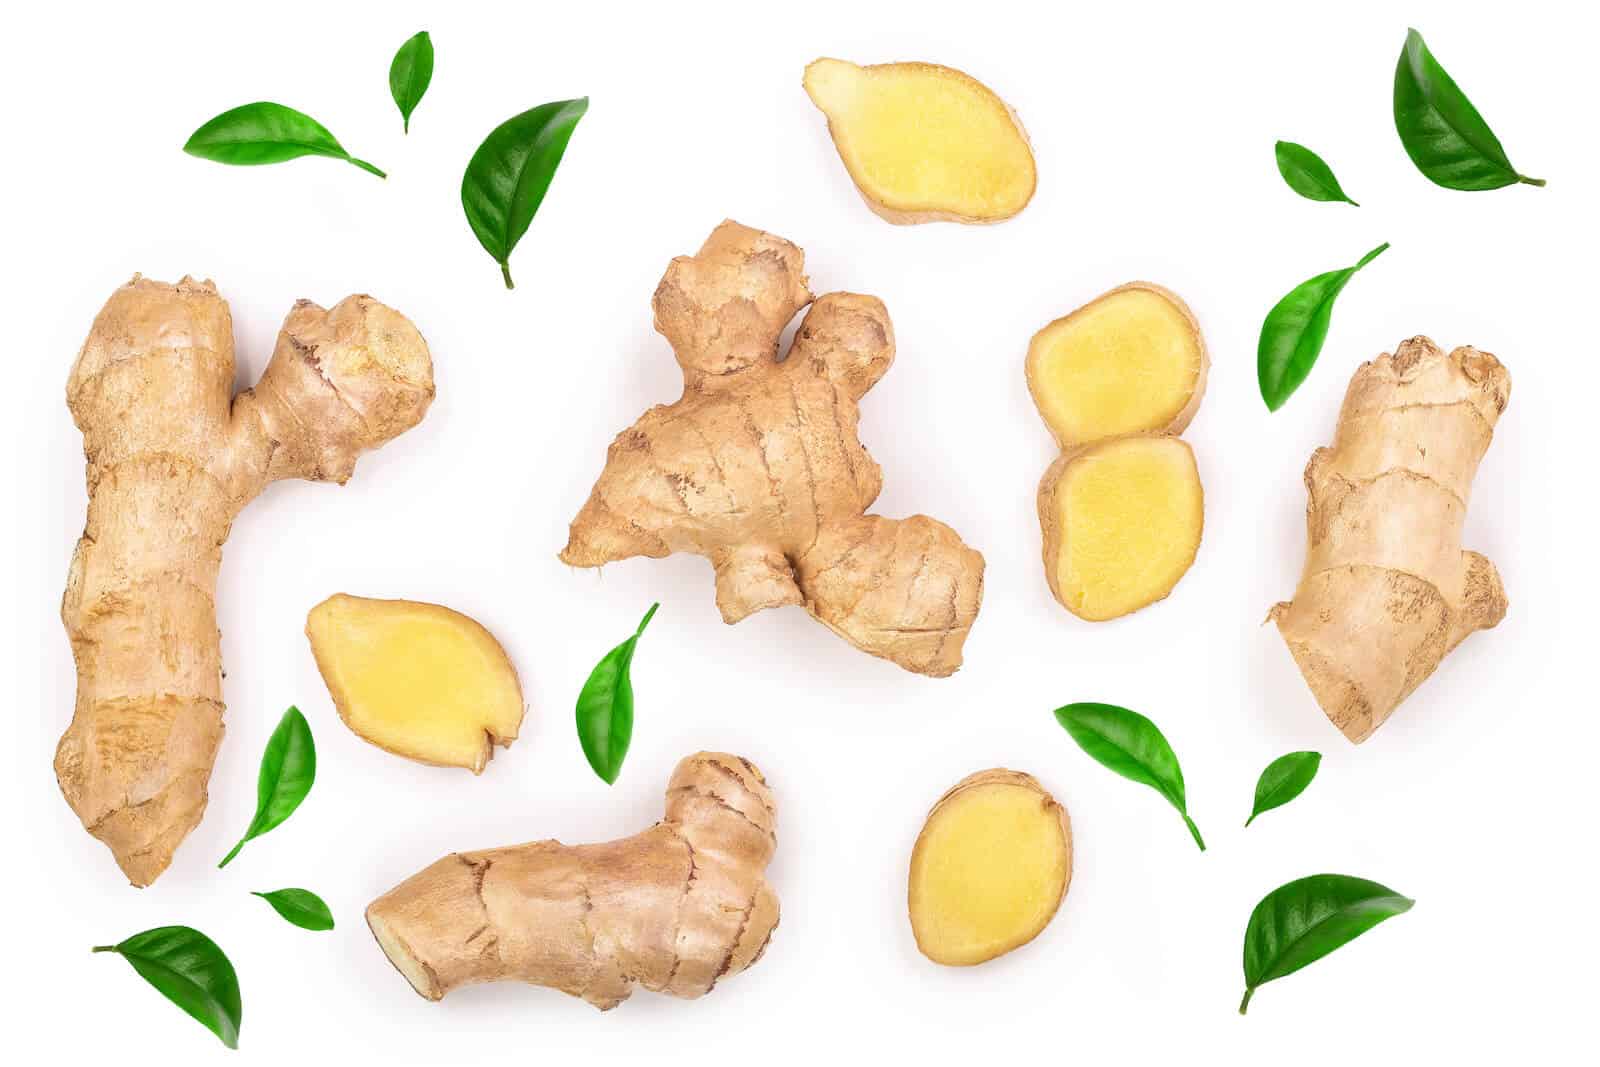 Ginger root and leaves